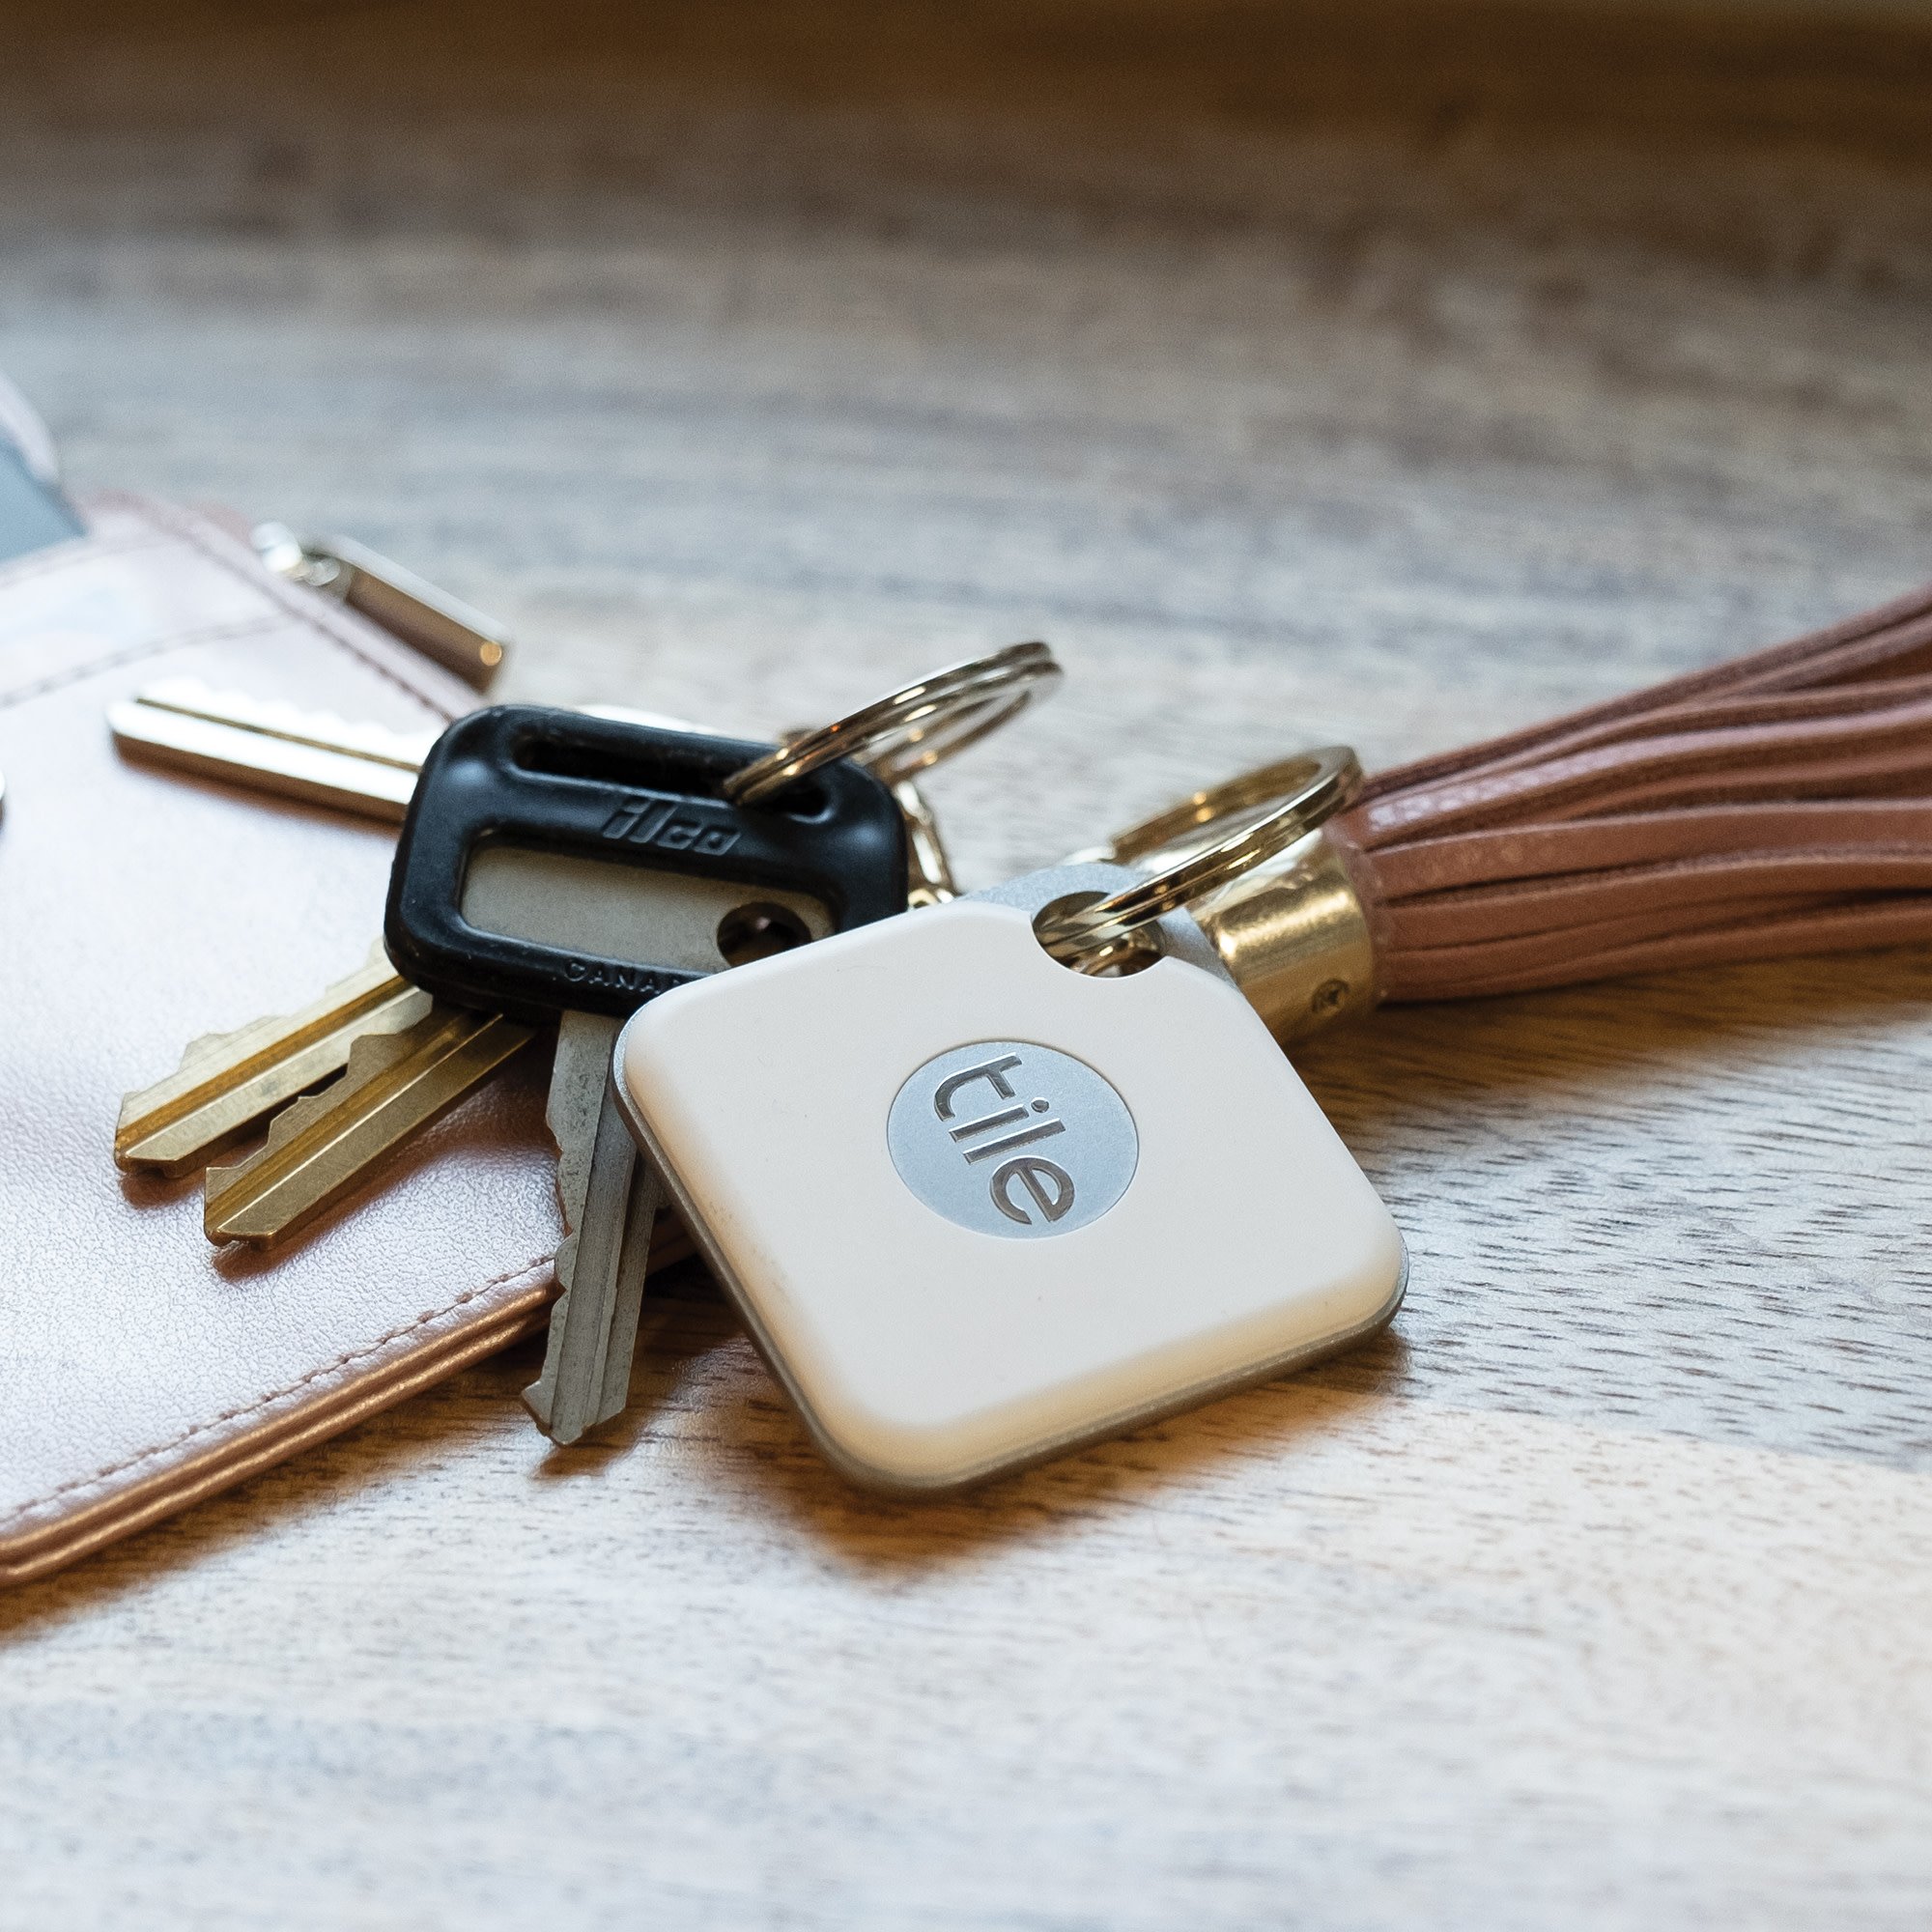 Locate your keys with Tile's tracker app | Tile